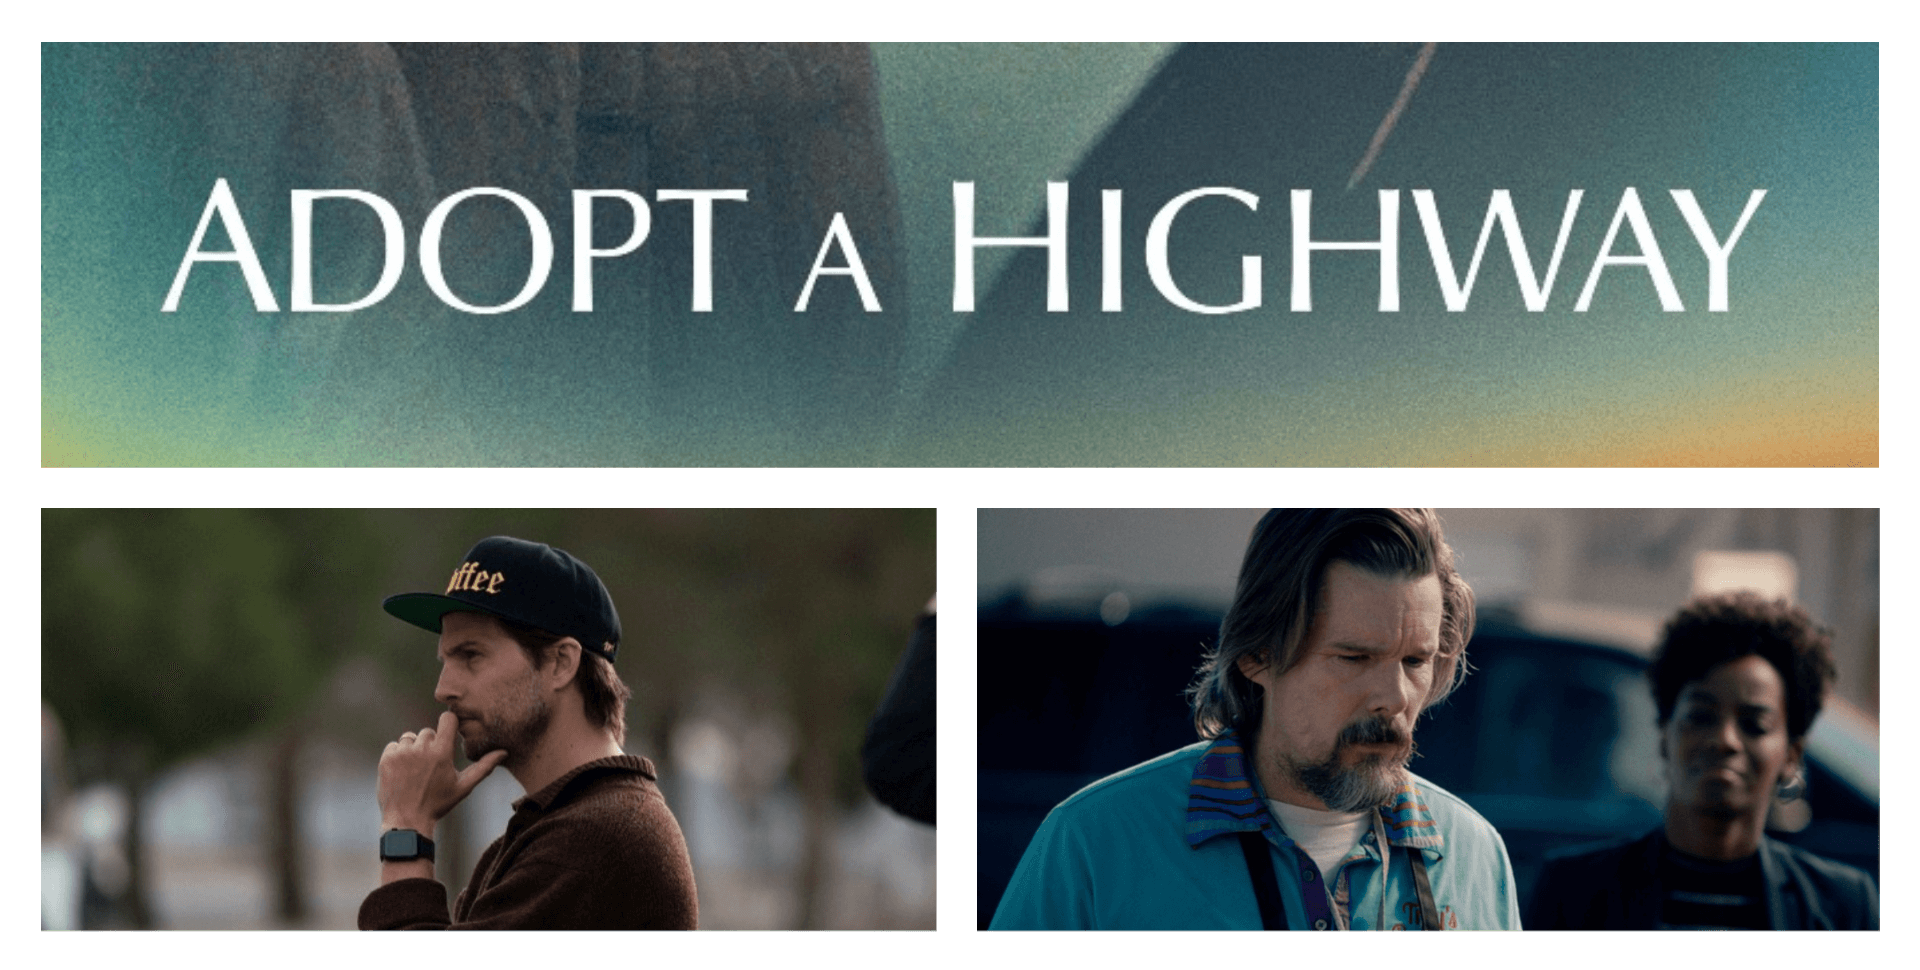 Logan Marshall-Green discusses Adopt a Highway in interview